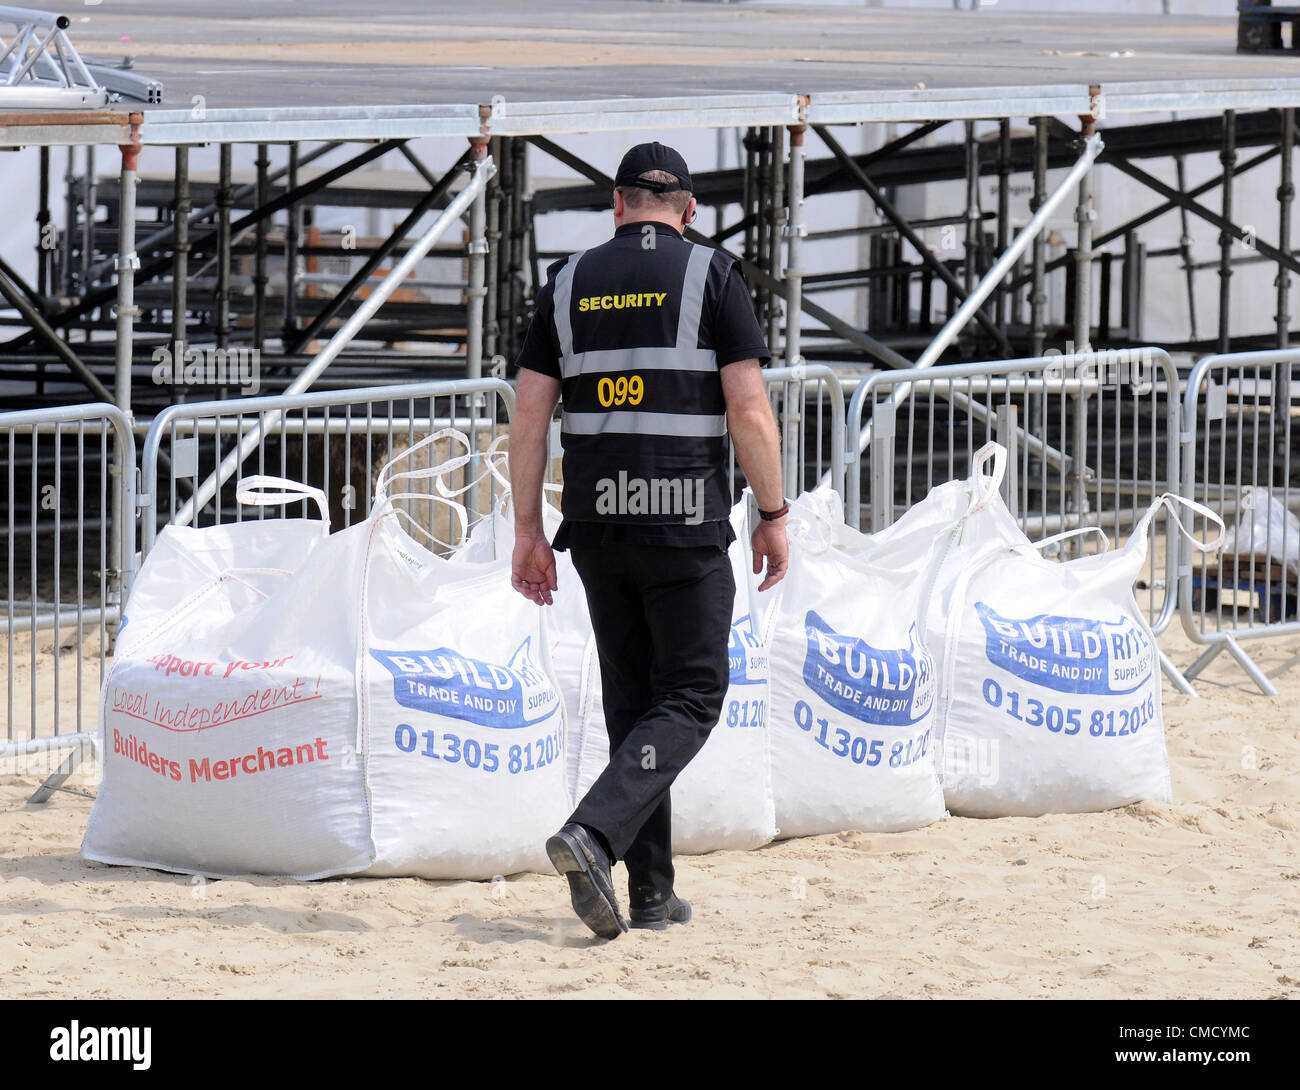 Olympic event preparations and security on Weymouth Beach, Dorset, Britain, UK 21/07/2012 PICTURE: DORSET MEDIA SERVICE Stock Photo